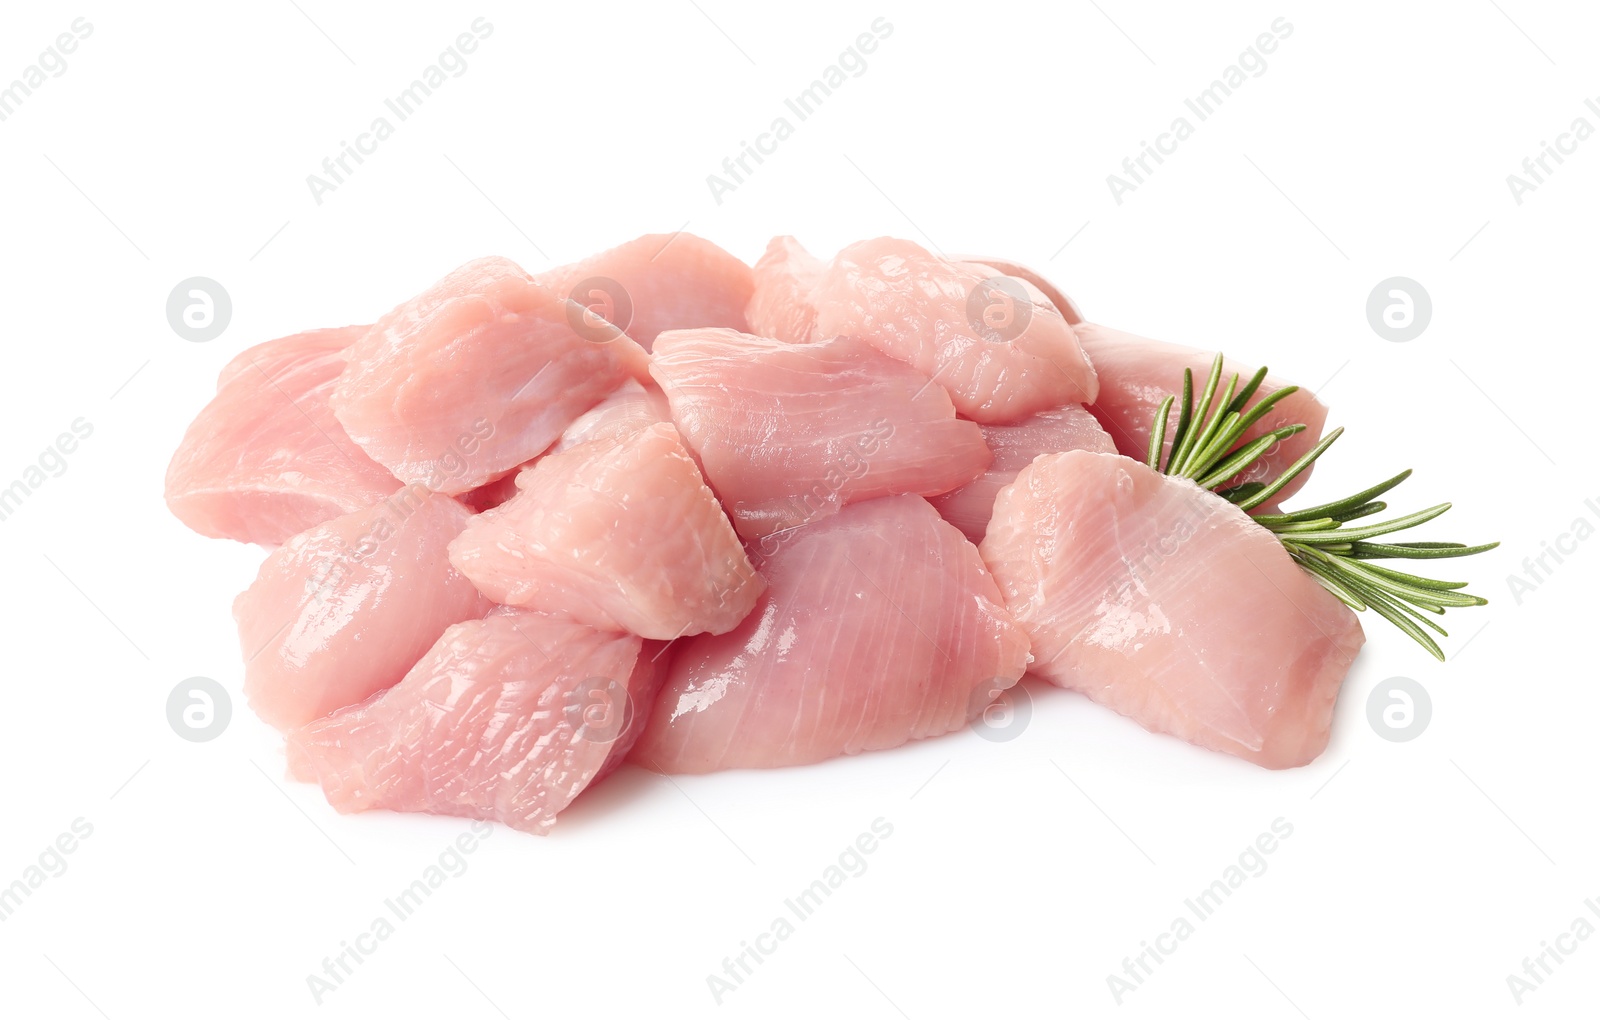 Photo of Cut raw turkey fillet with rosemary on white background